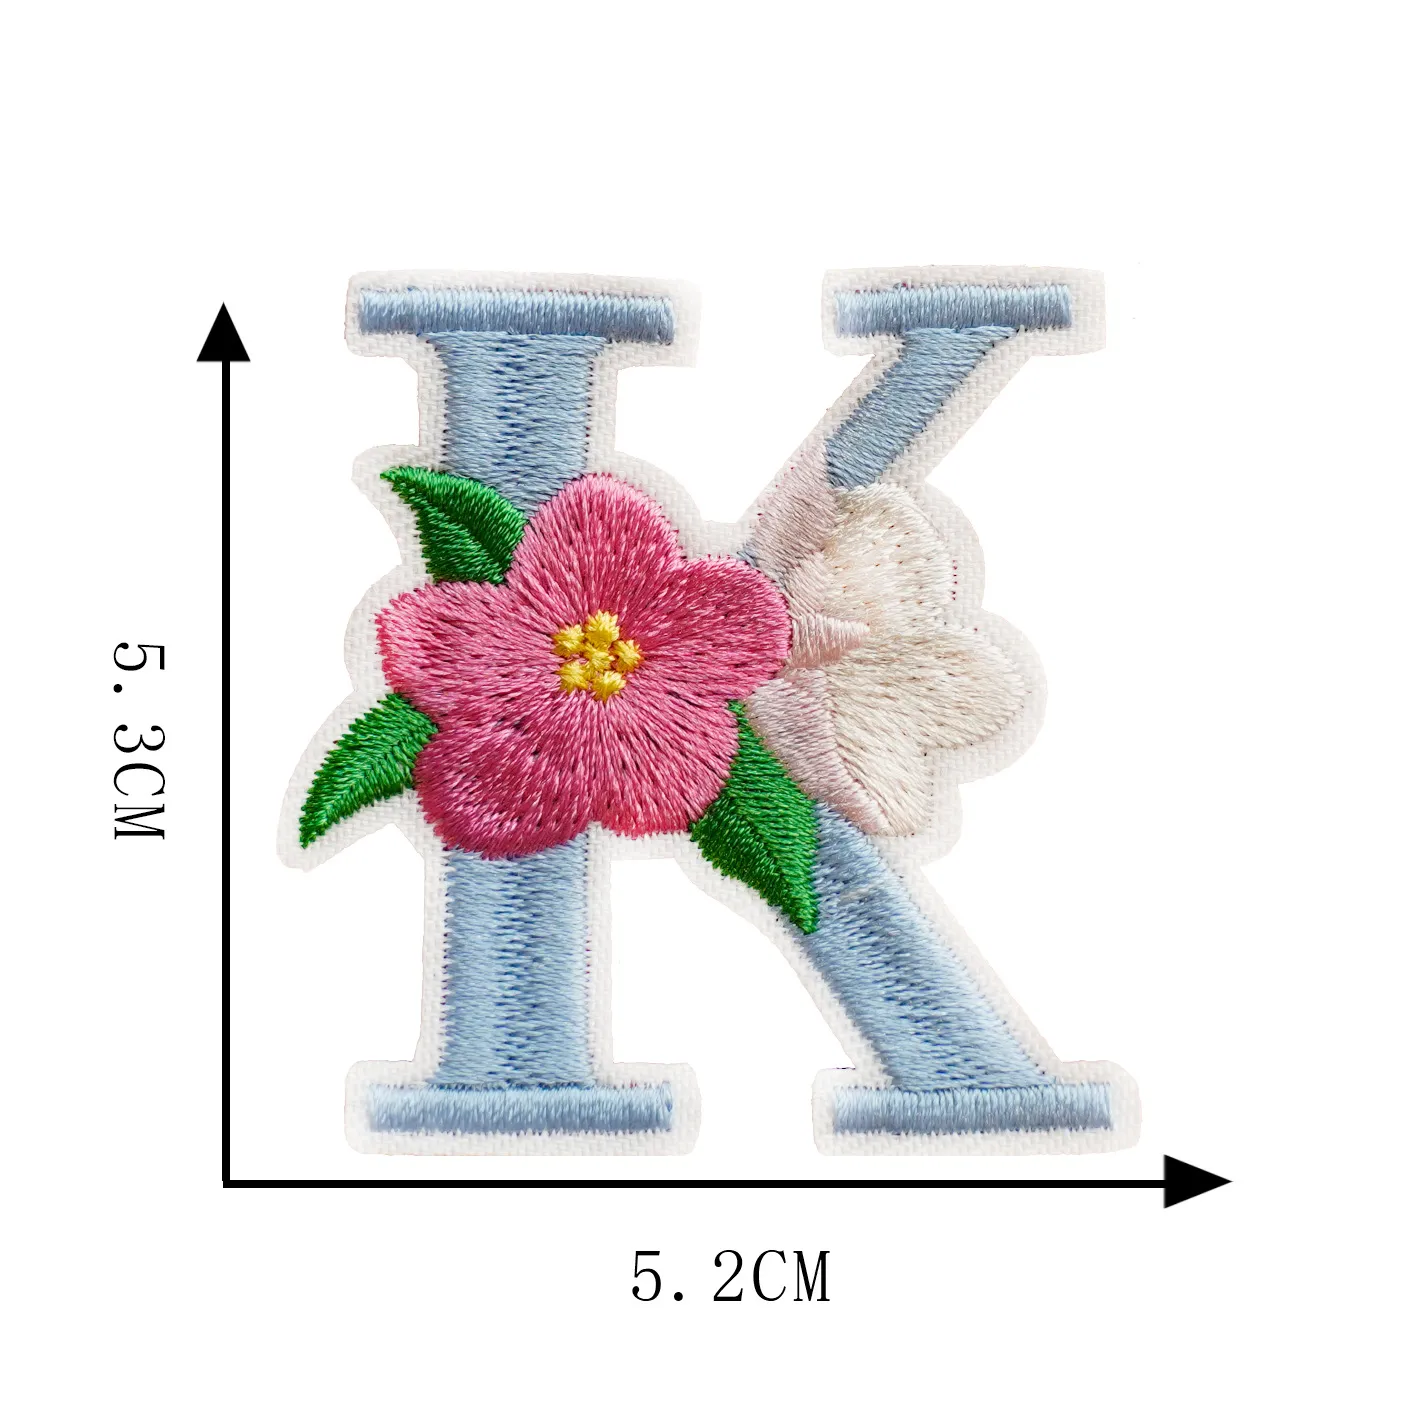 Colorful Flower Embroidered Patch Letters Iron On Sewing Notion For  Clothes, Pink Trucker Hat, Shirts, Bags A Z Alphabet Applique DIY  Accessories From Moomoo2016, $0.73